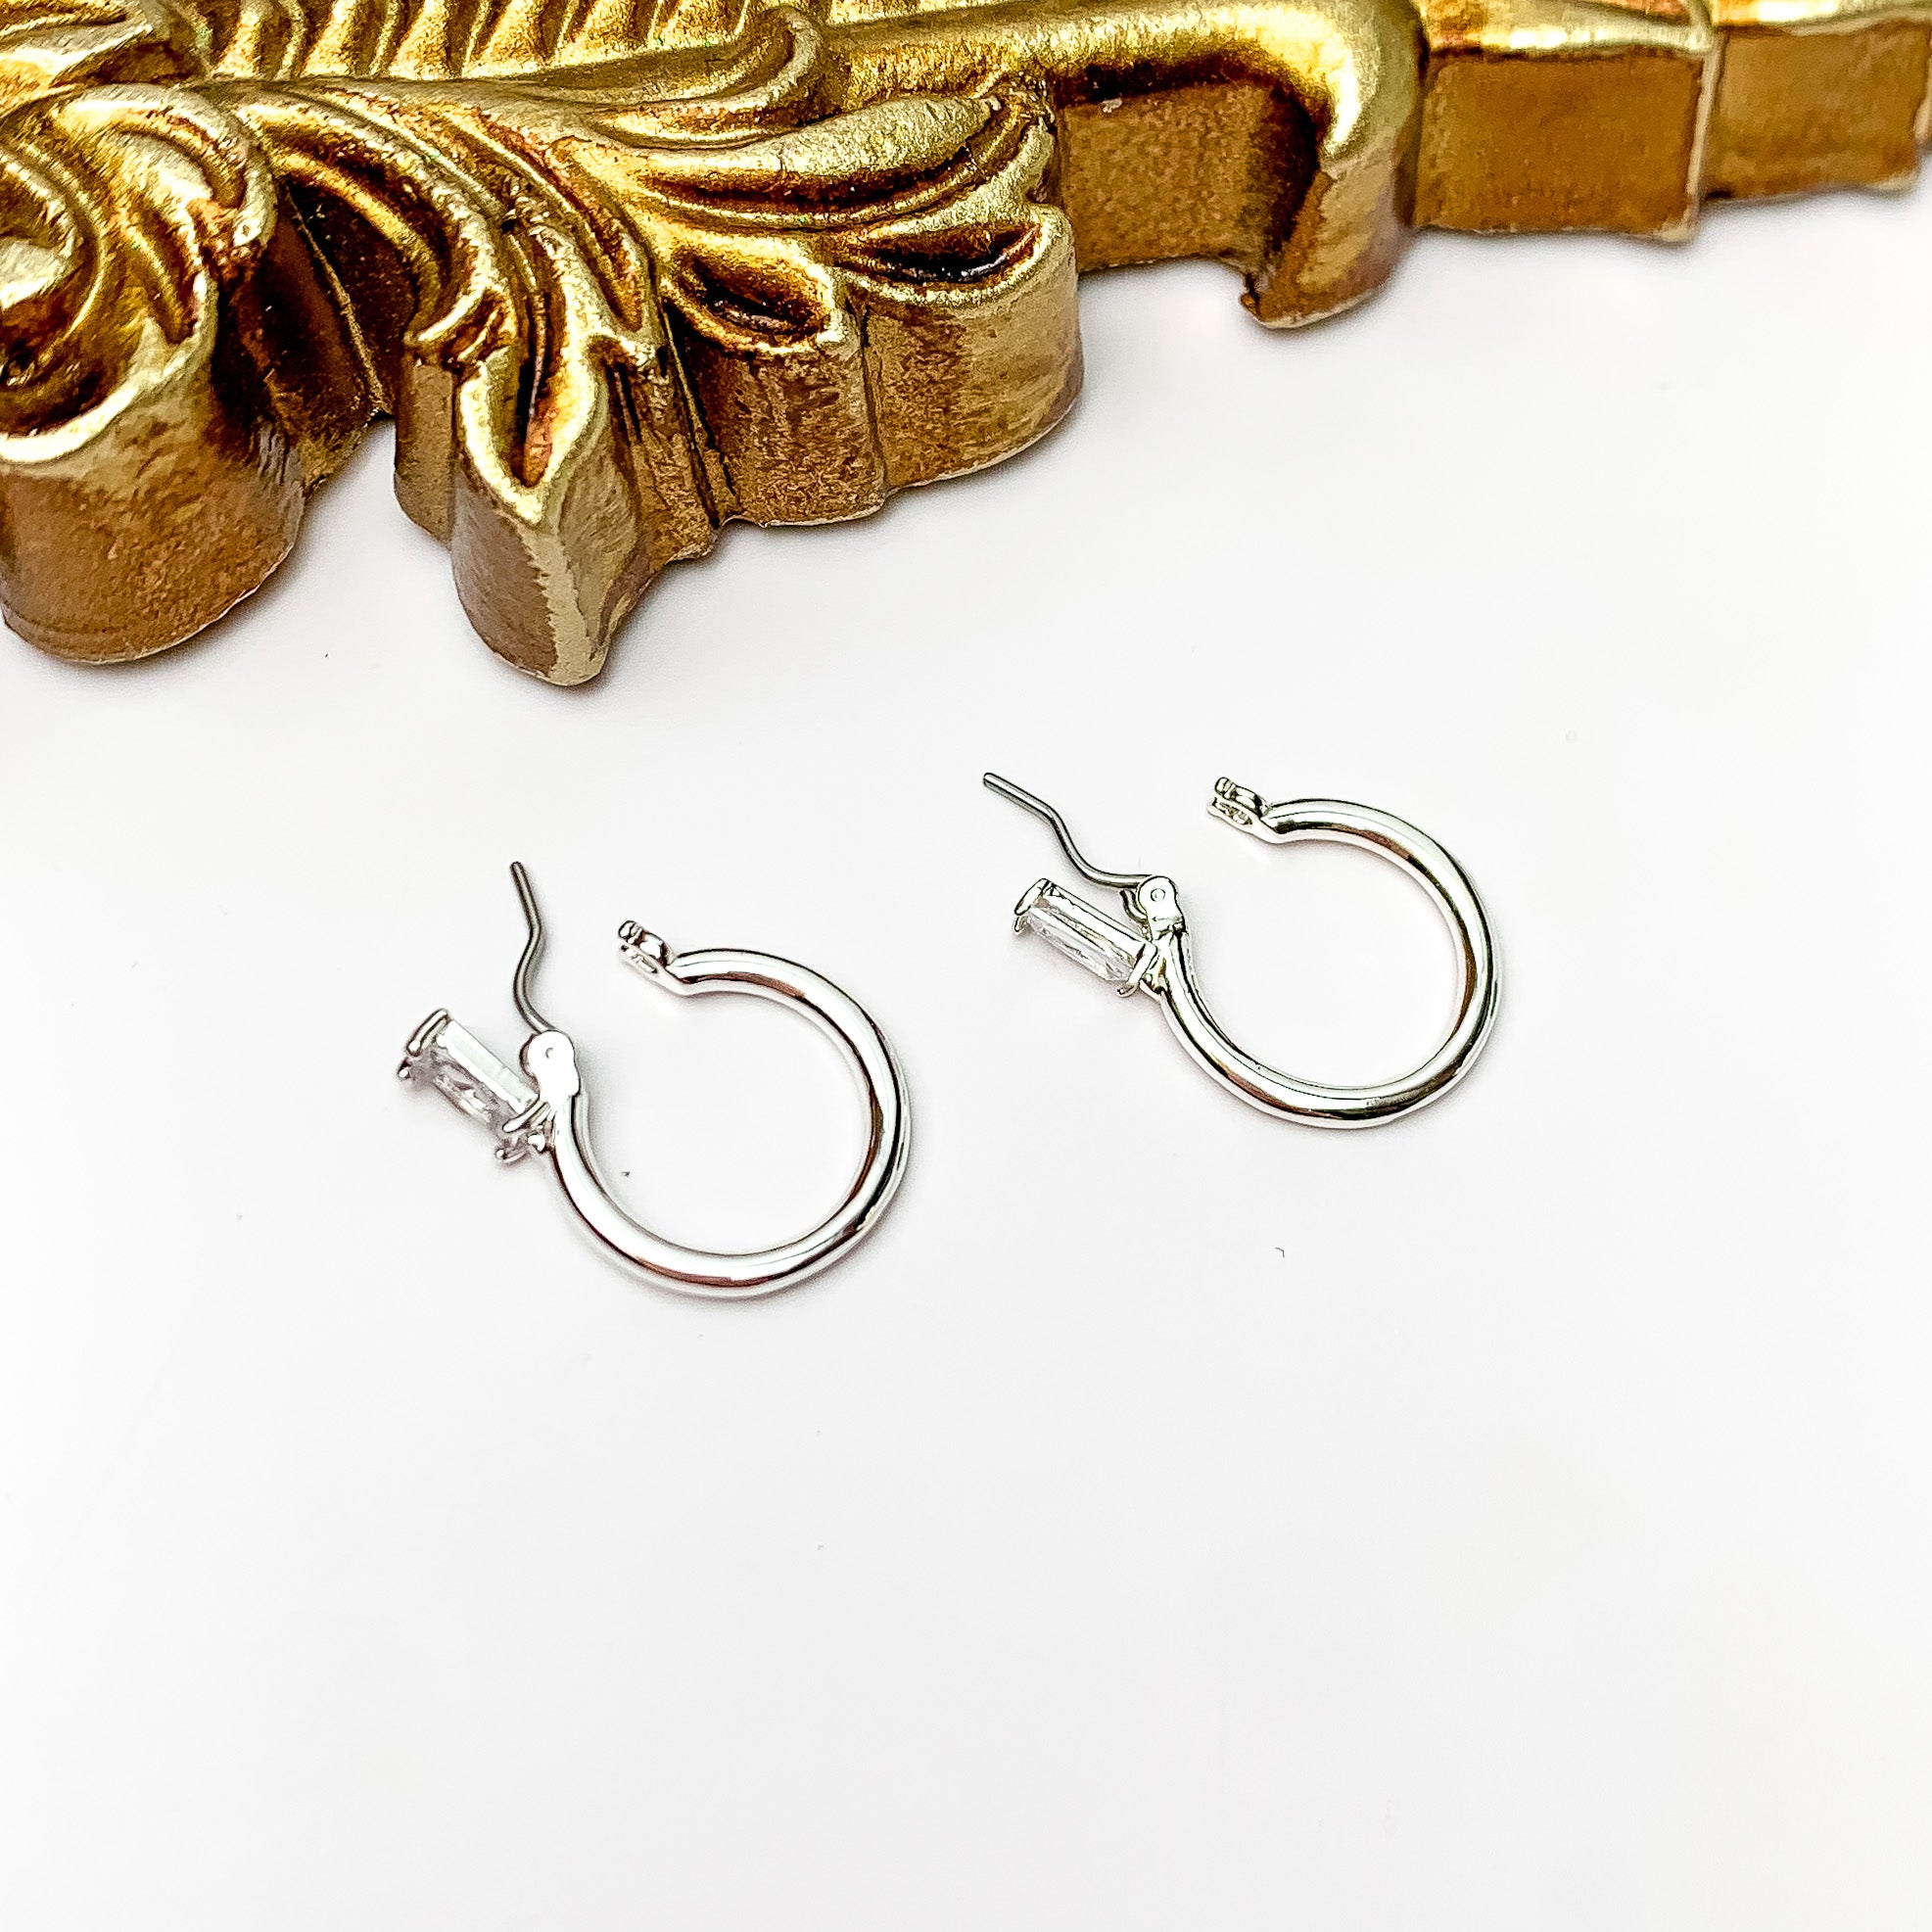 Kinsey Designs | Dara Mini Hoop Earrings with CZ Crystals - Giddy Up Glamour Boutique